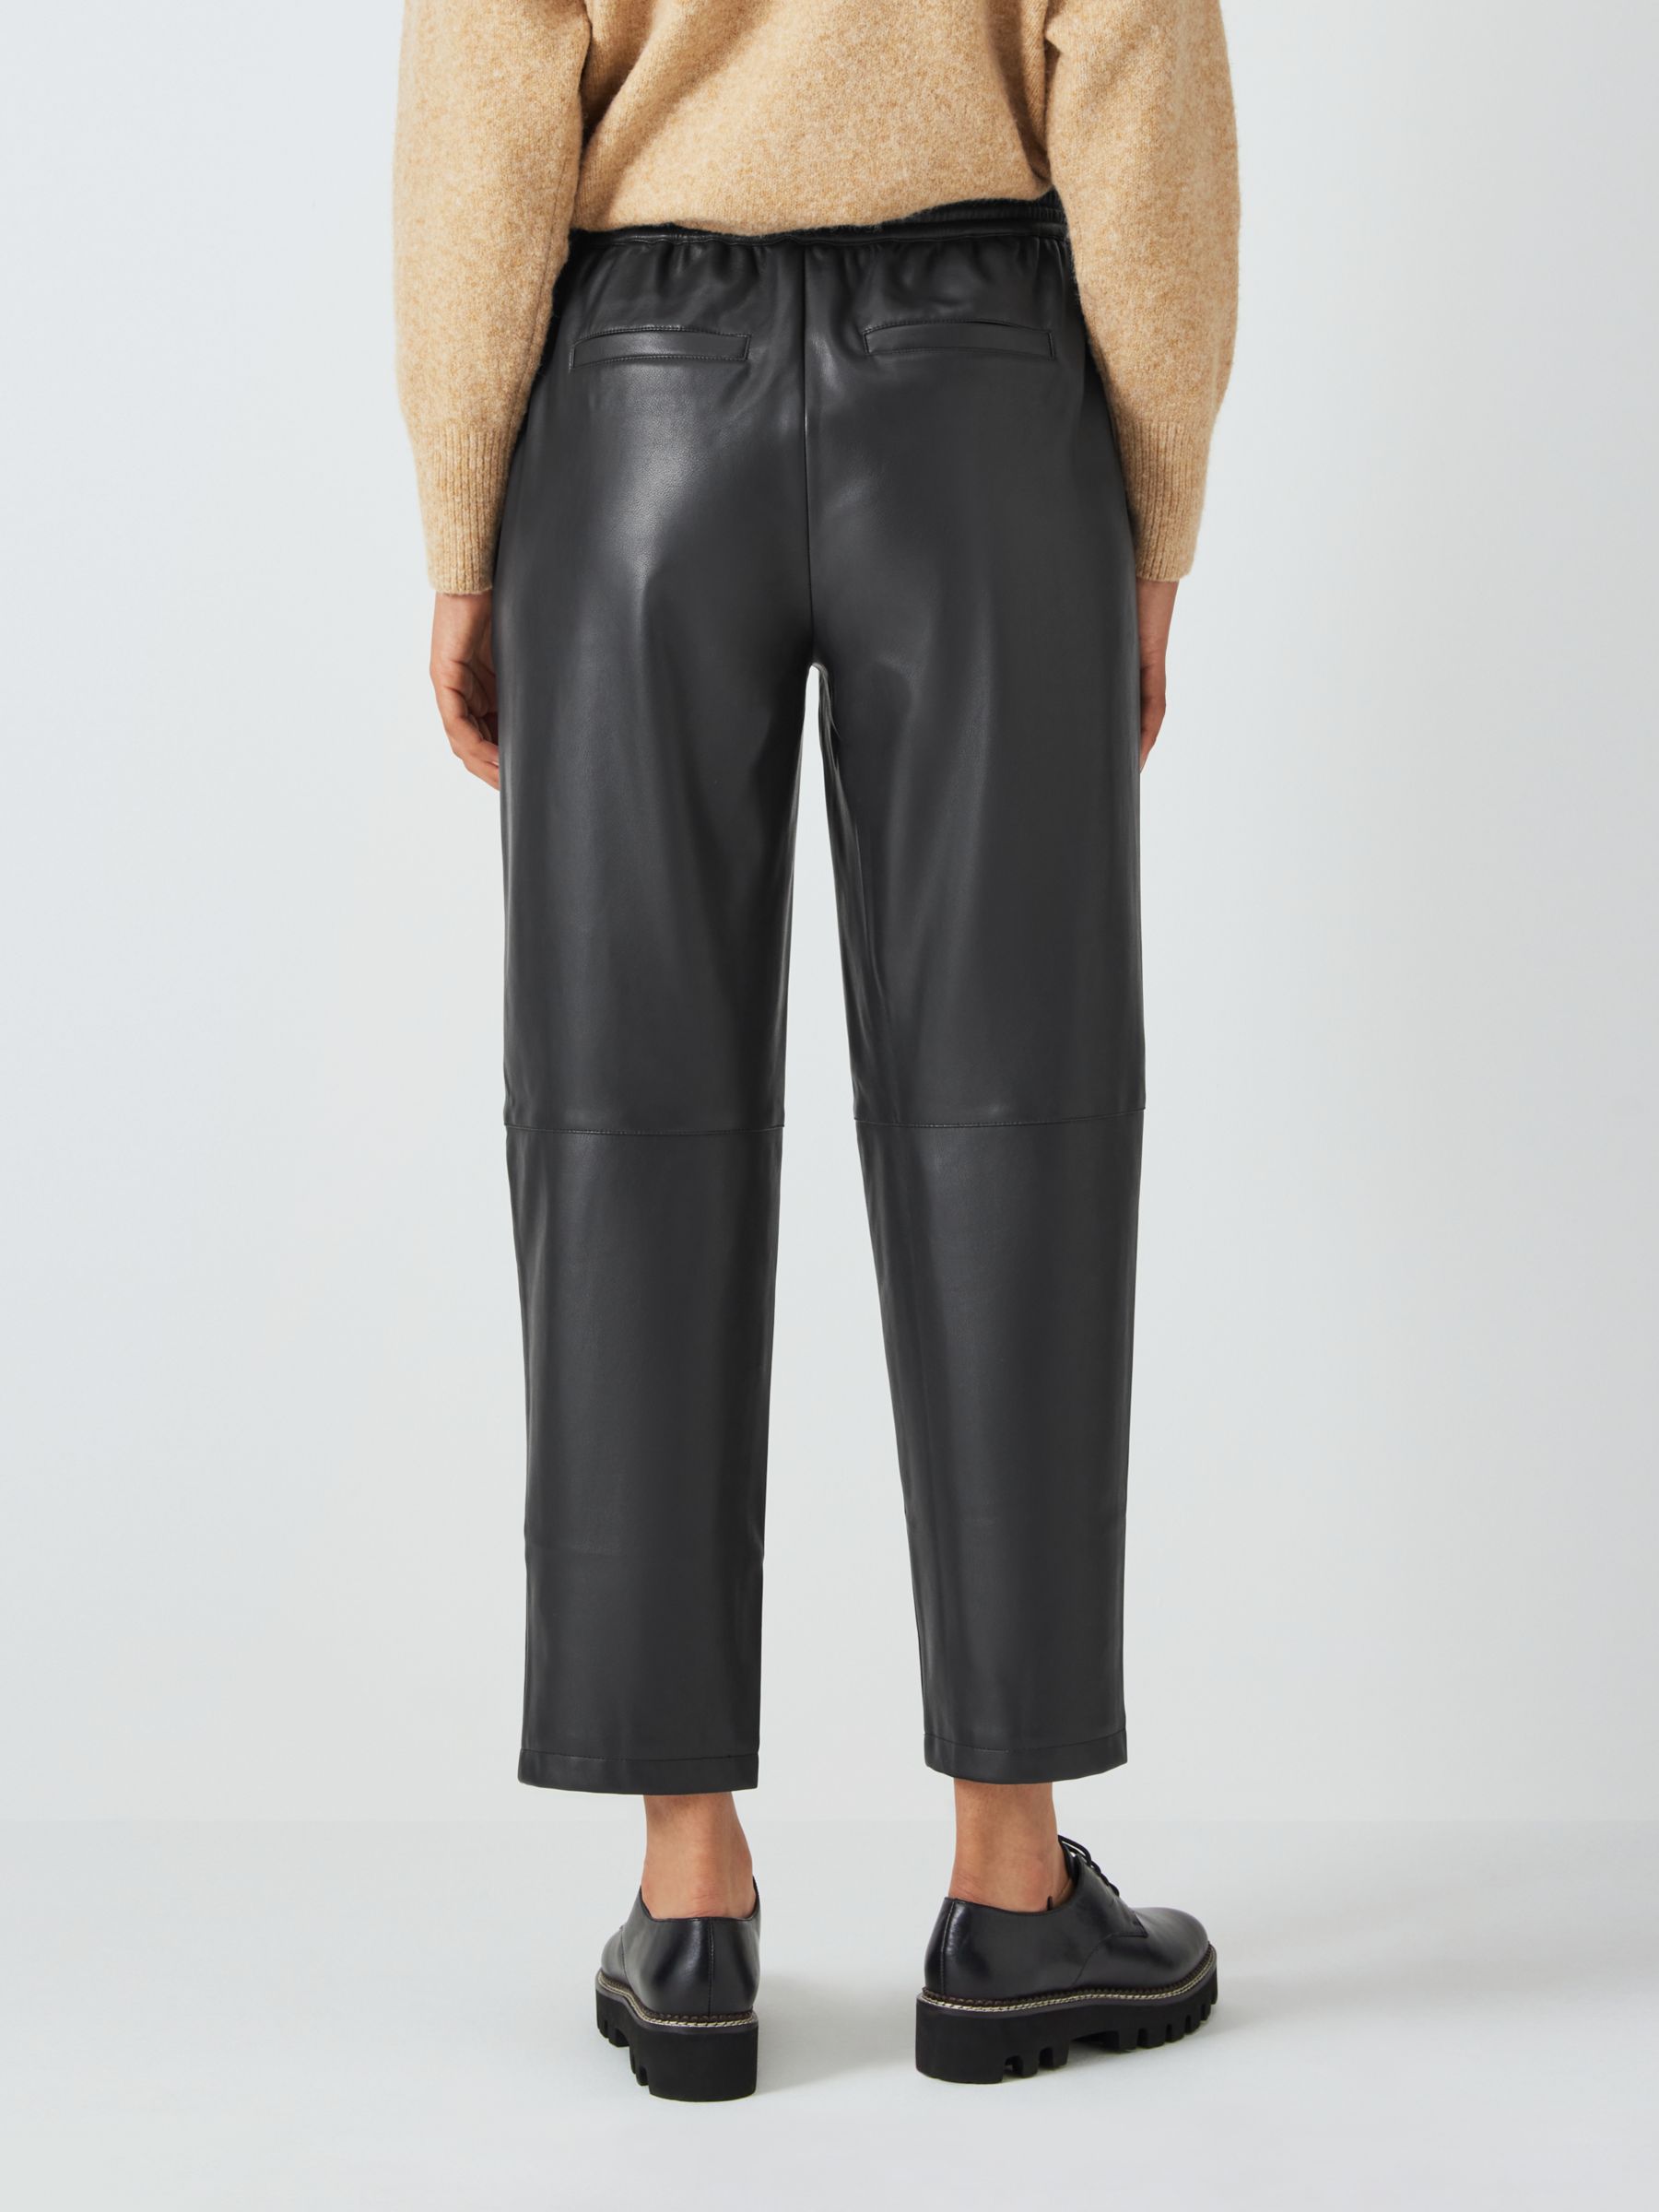 John Lewis ANYDAY Plain Faux Leather Trousers, Black at John Lewis ...